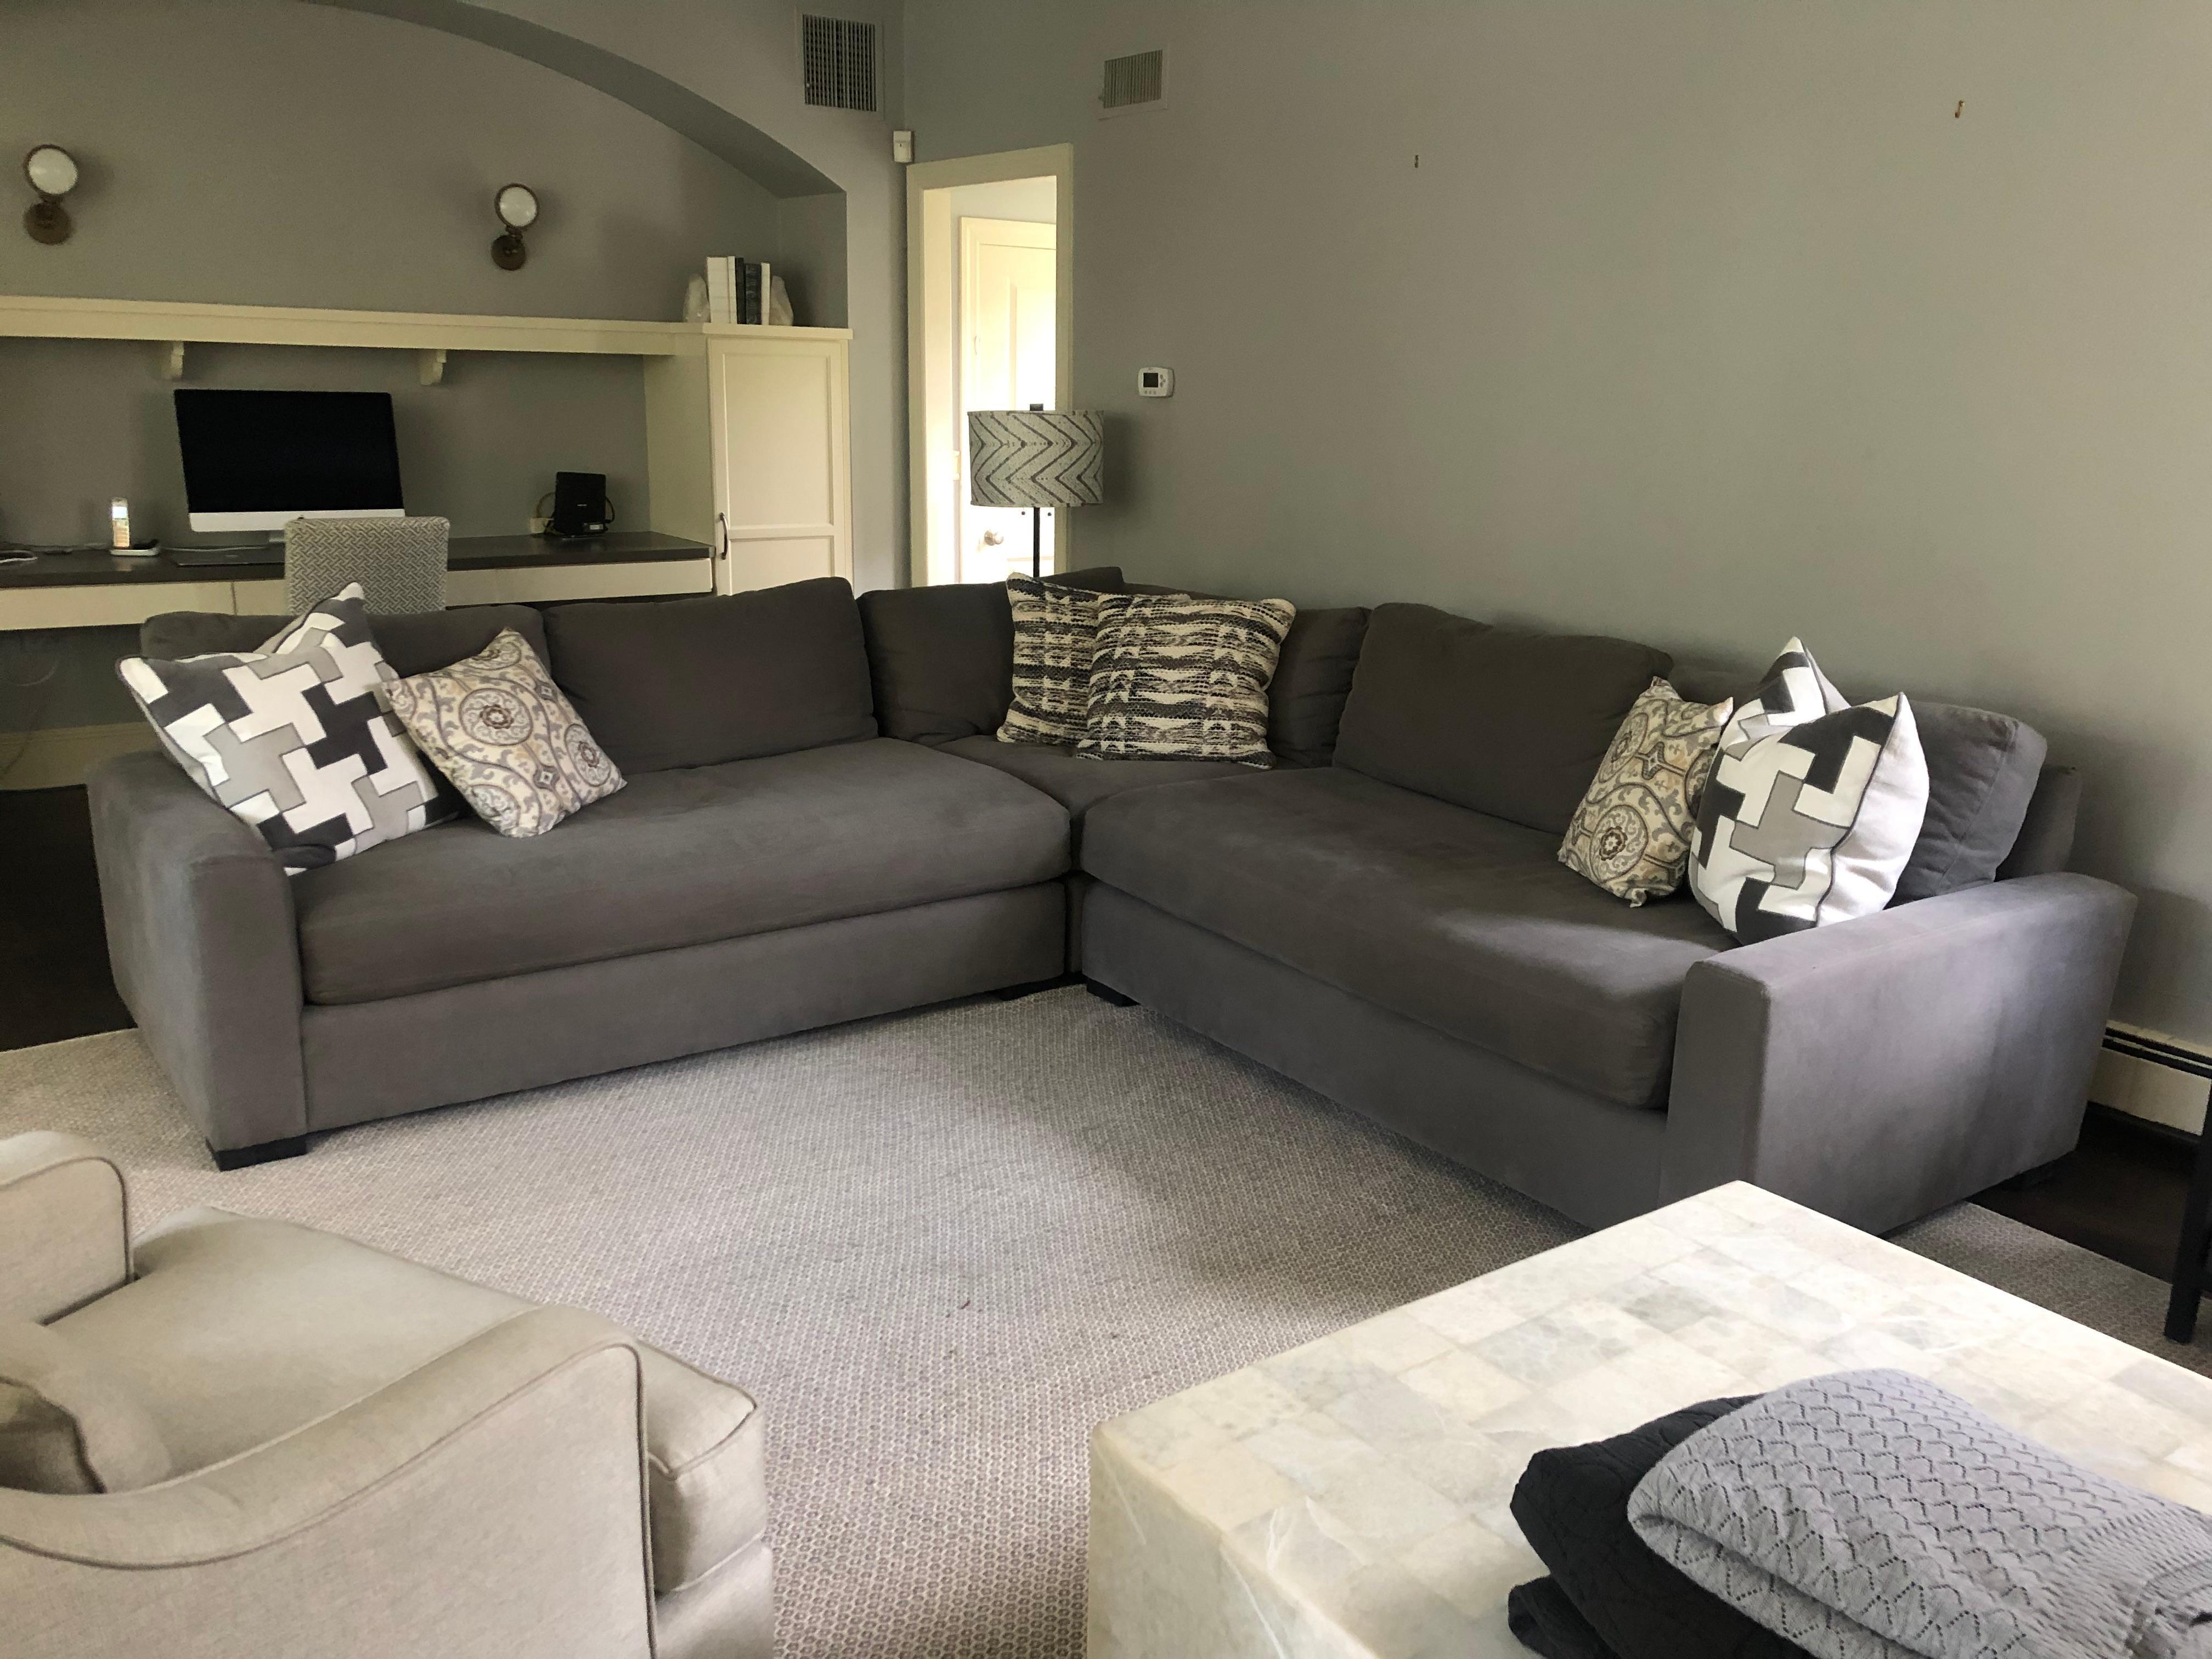 Big and nap worthy sectional sofa, comfy enough for extra guests to sleep overnight on! Made by RH, 3 piece sectional sofa in a durable very neutral taupe upholstery having 3 pieces and removable cushions.
Measures: 70.5 x 44.5
70.5 x 44.5
45 x